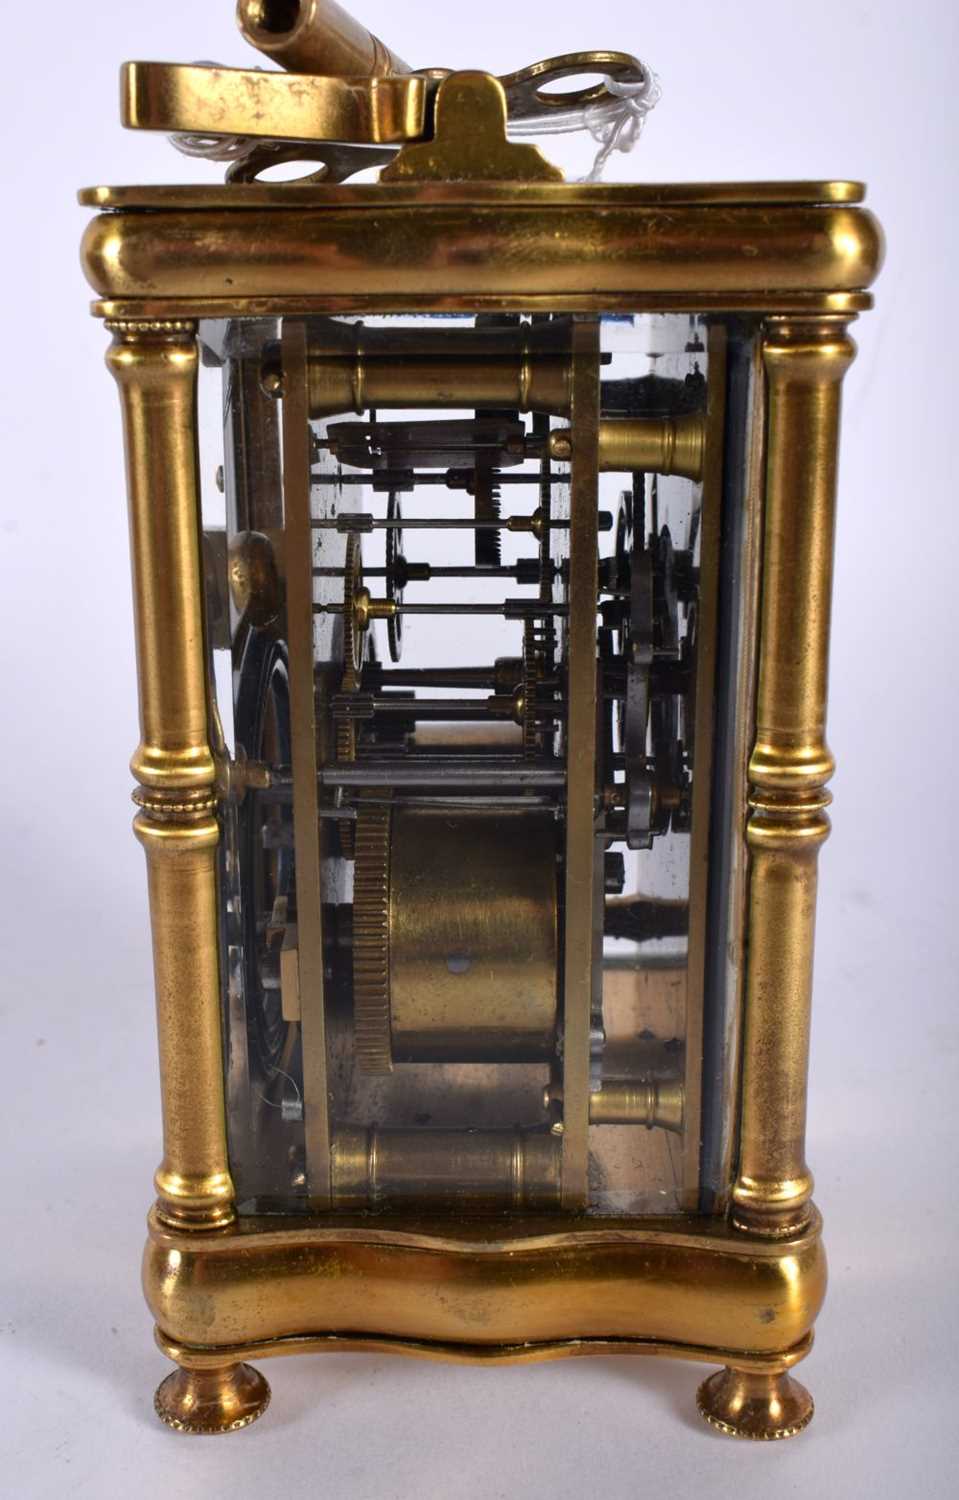 A CASED ANTIQUE BRASS CARRIAGE CLOCK. 14.5 cm high inc handle. - Image 5 of 7